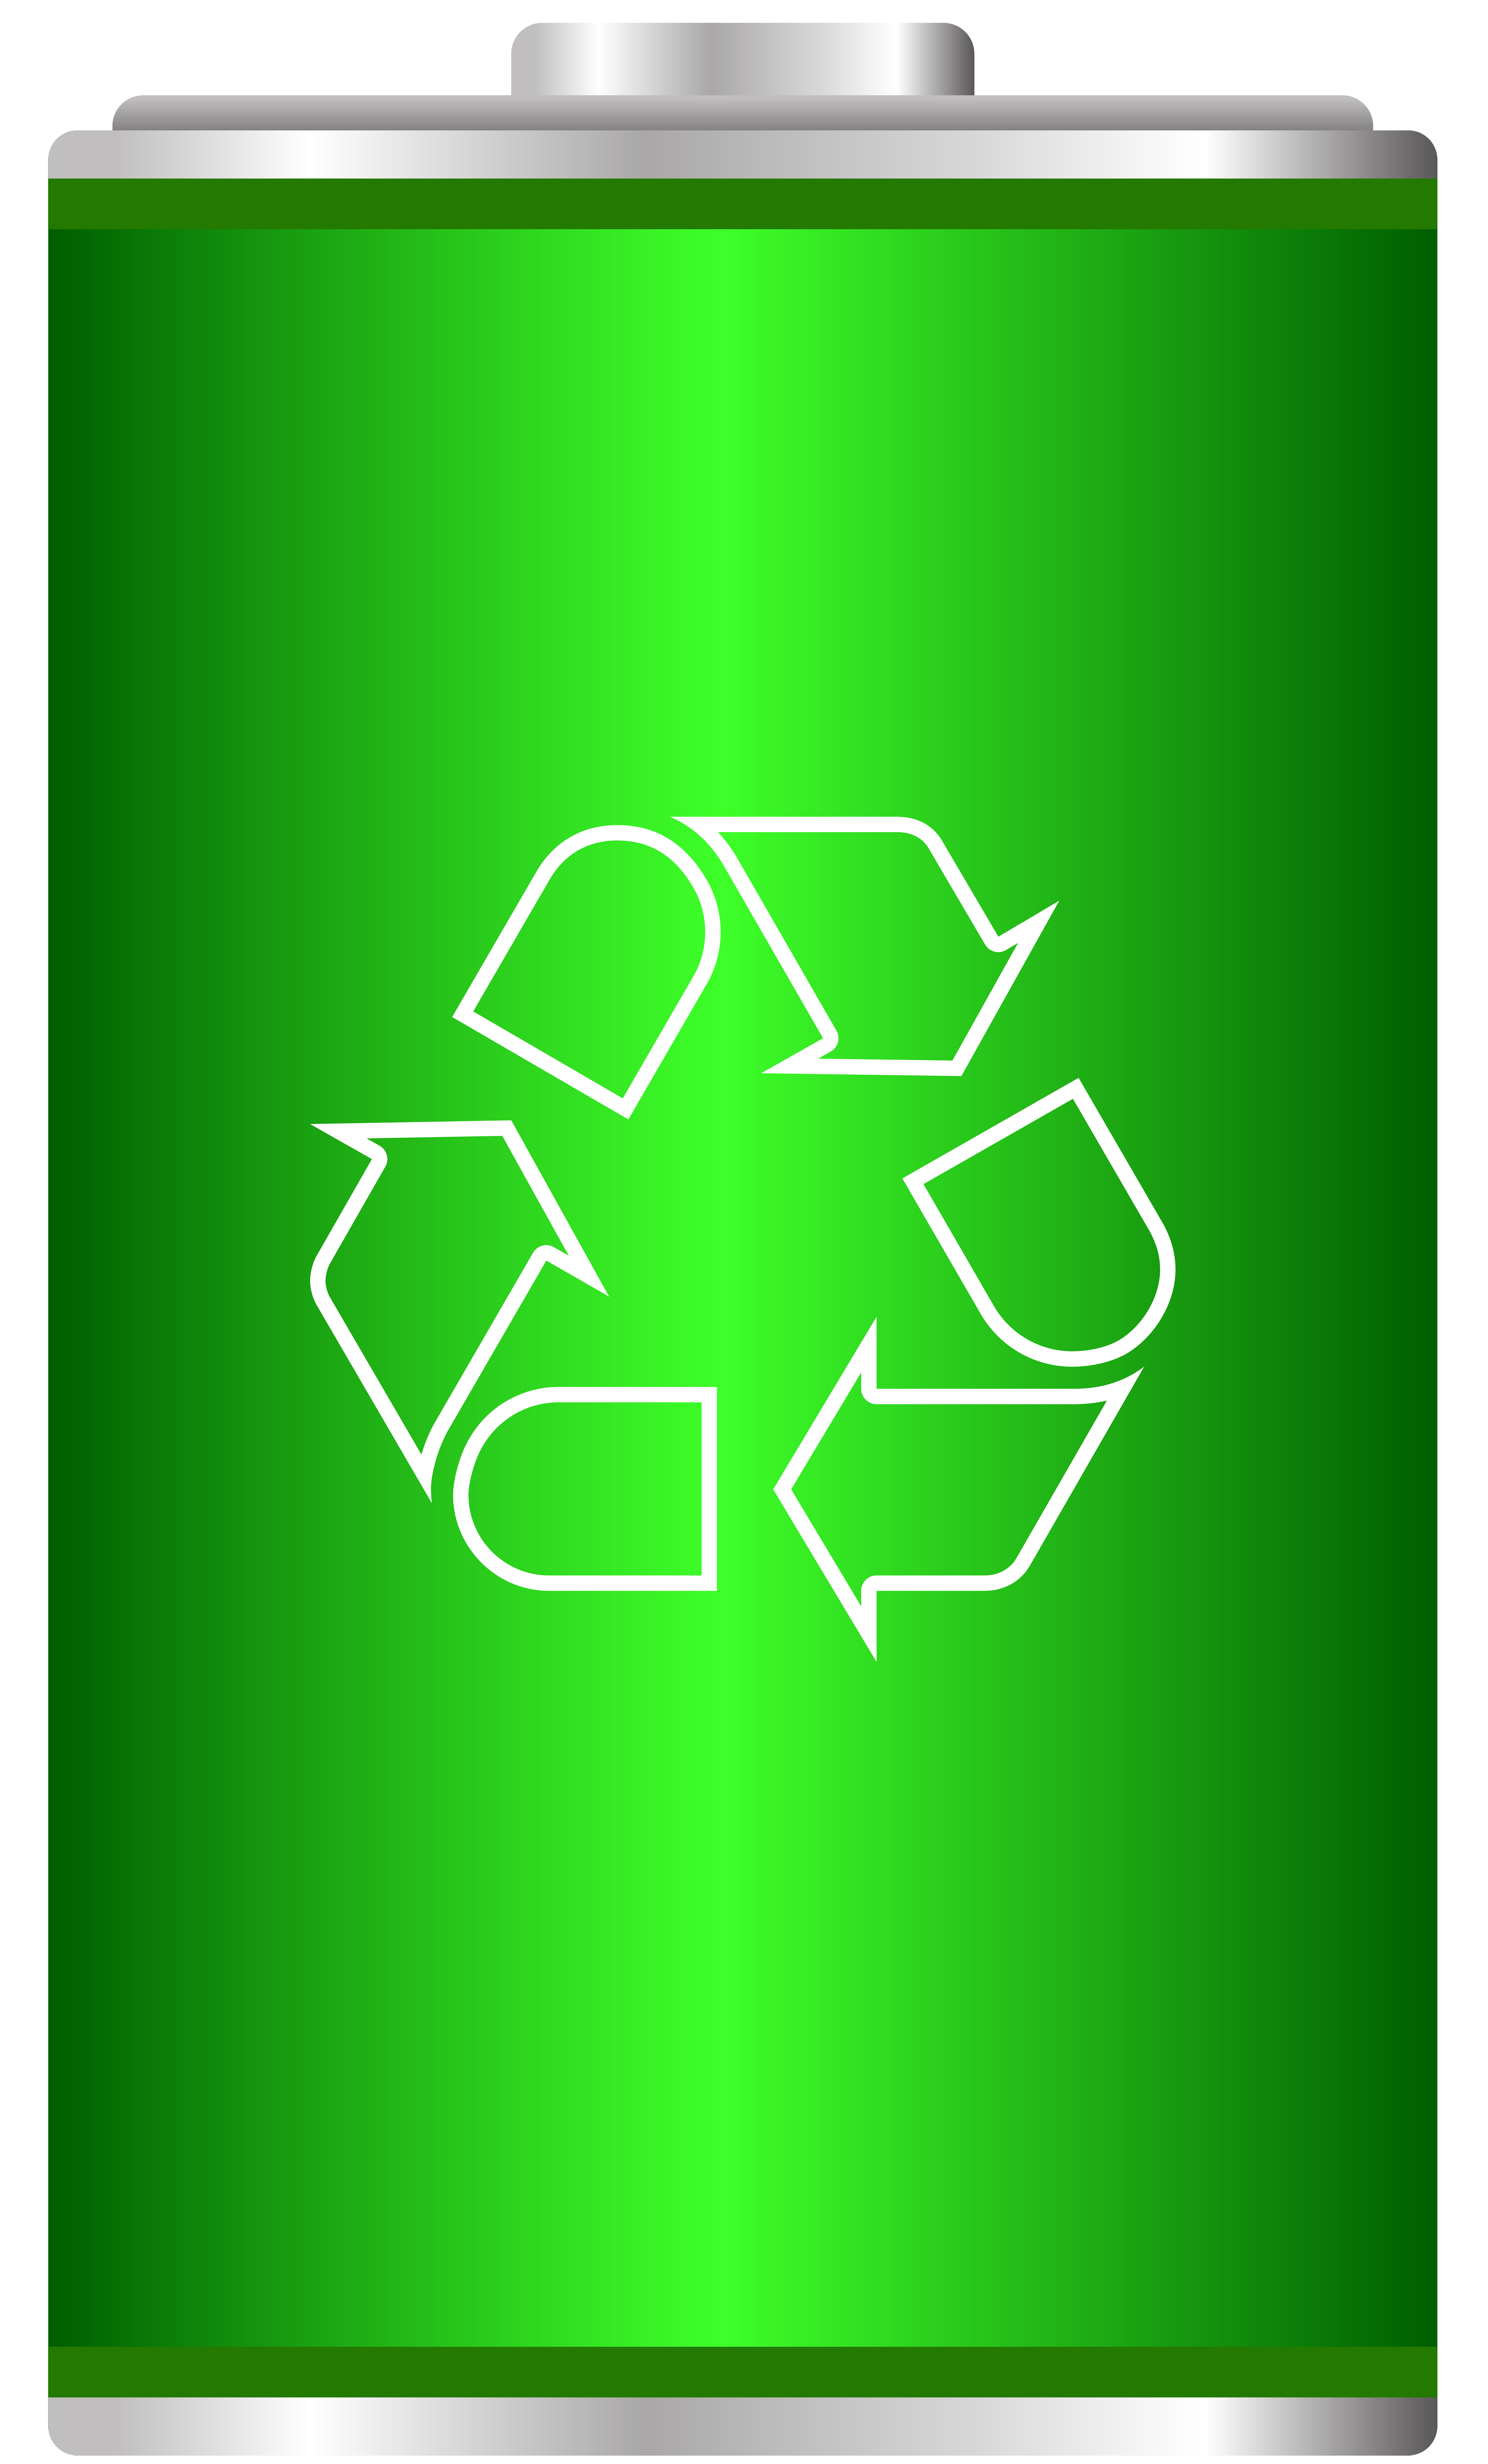 Recycle batteries. Battery Recycling. Пионер рециклинг. Battery Recycling PNG. Coming soon Battery 95 PNG.